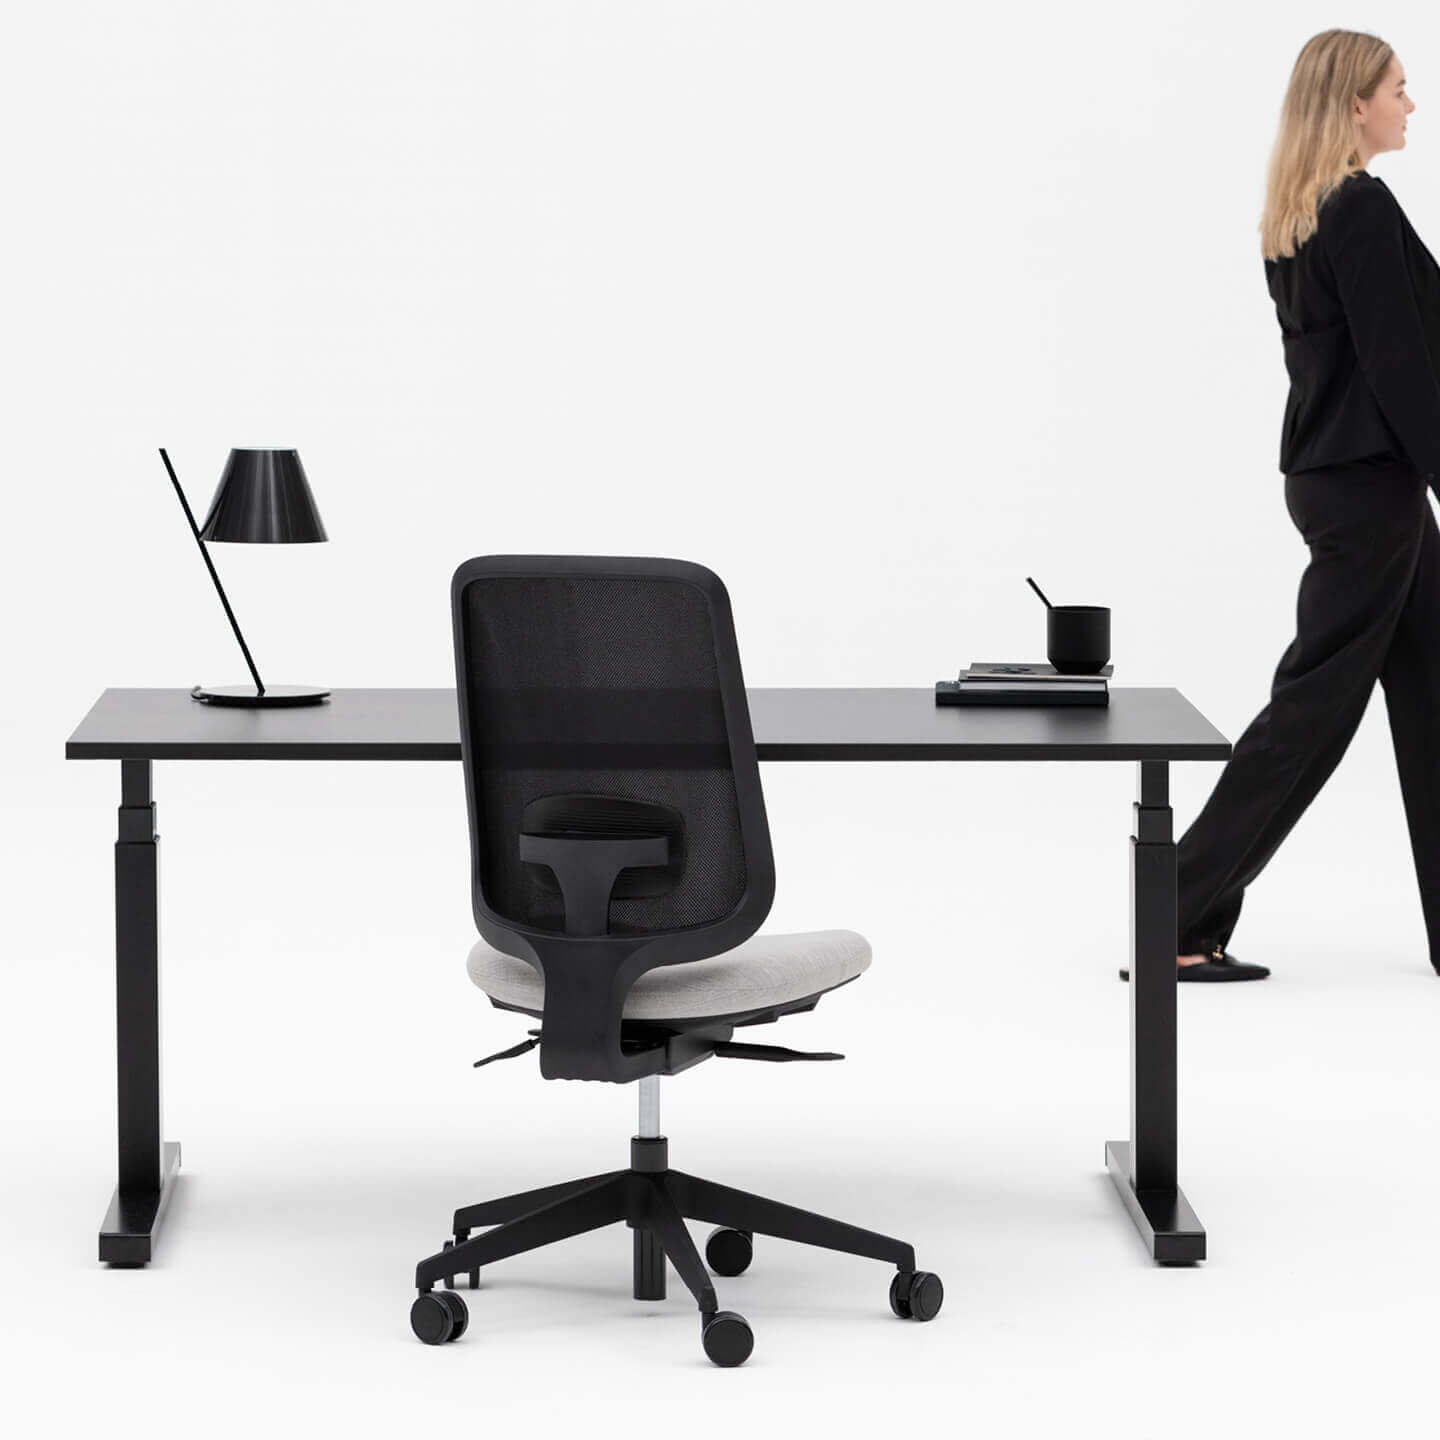 Person Walking By a Height Adjustable Black Desk and Black Framed Office Chair With No Arms